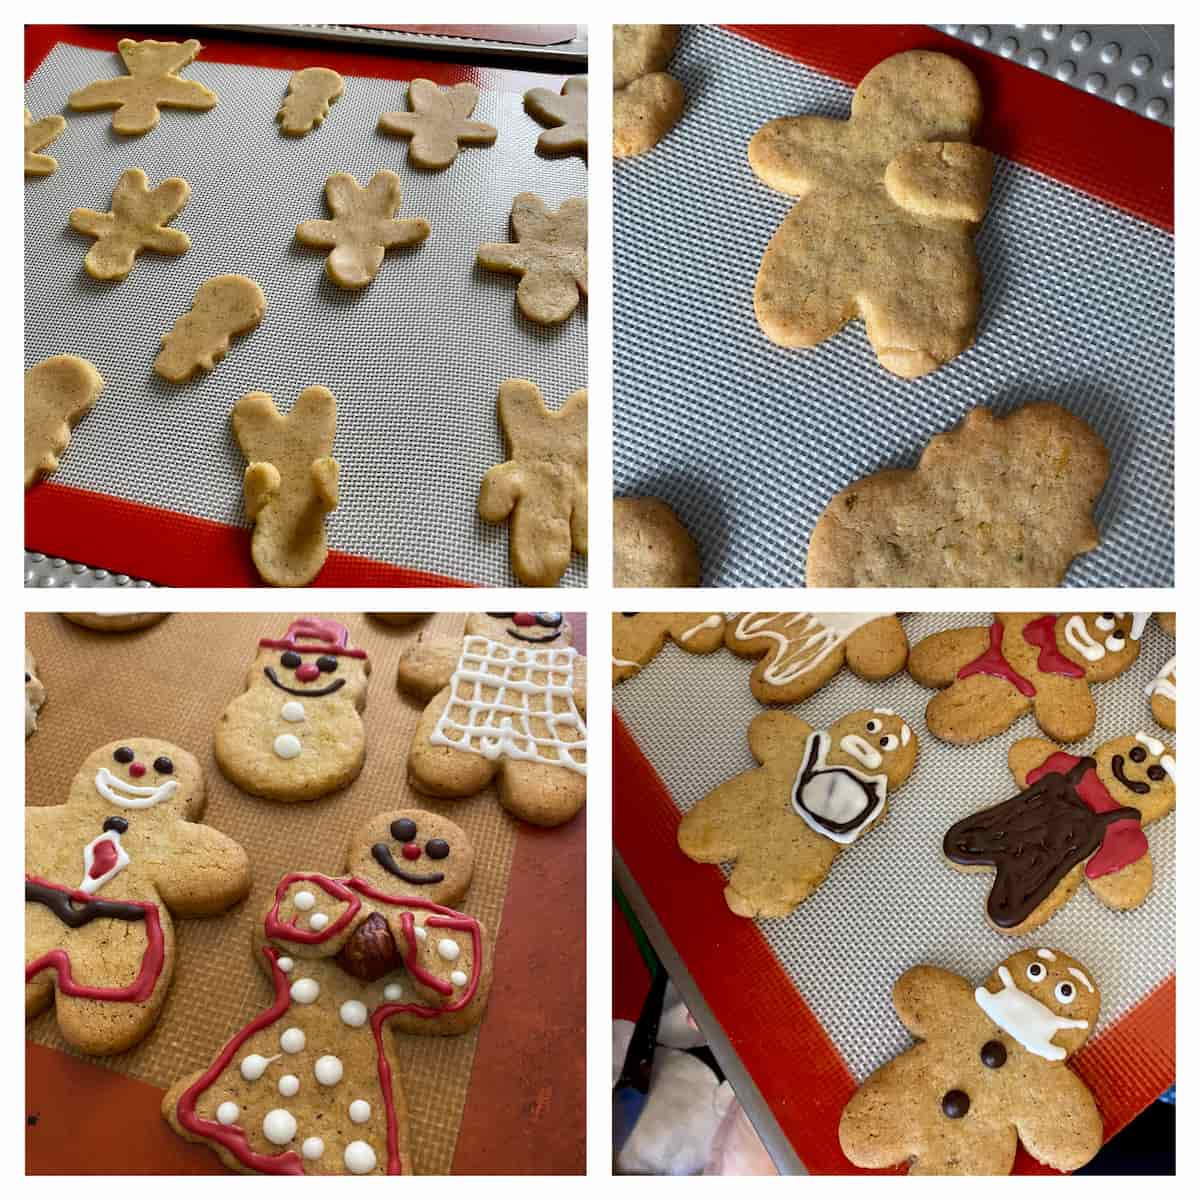 Baking gingerbread men and women - adding a nut - then decorating